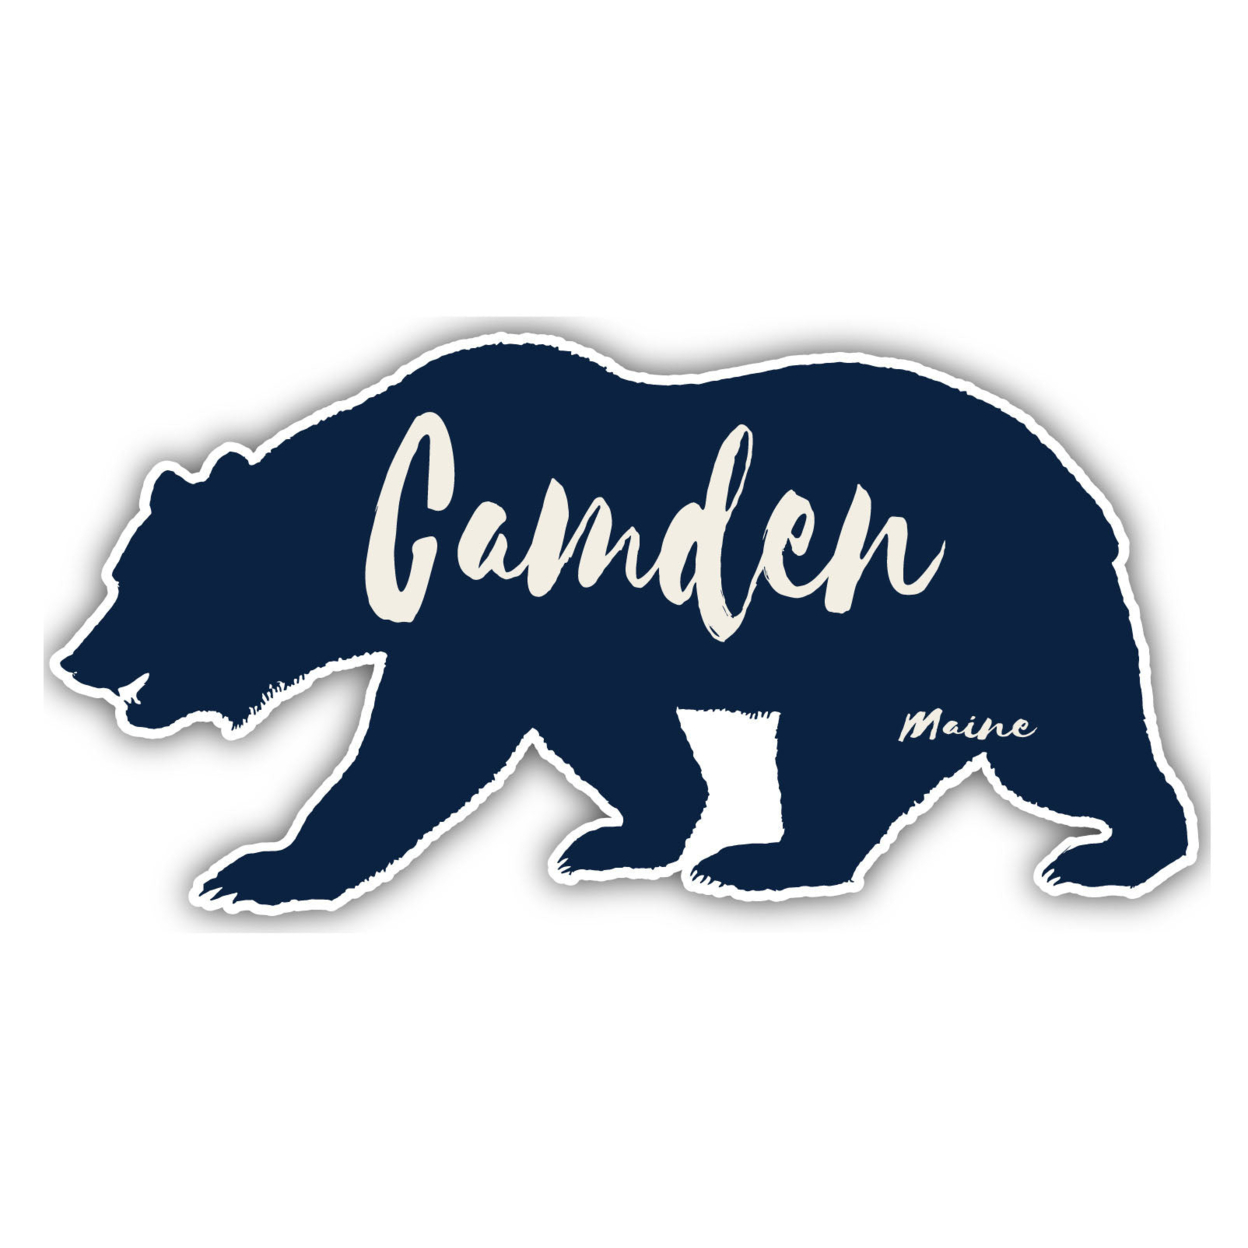 Camden Maine Souvenir Decorative Stickers (Choose Theme And Size) - 4-Pack, 4-Inch, Bear